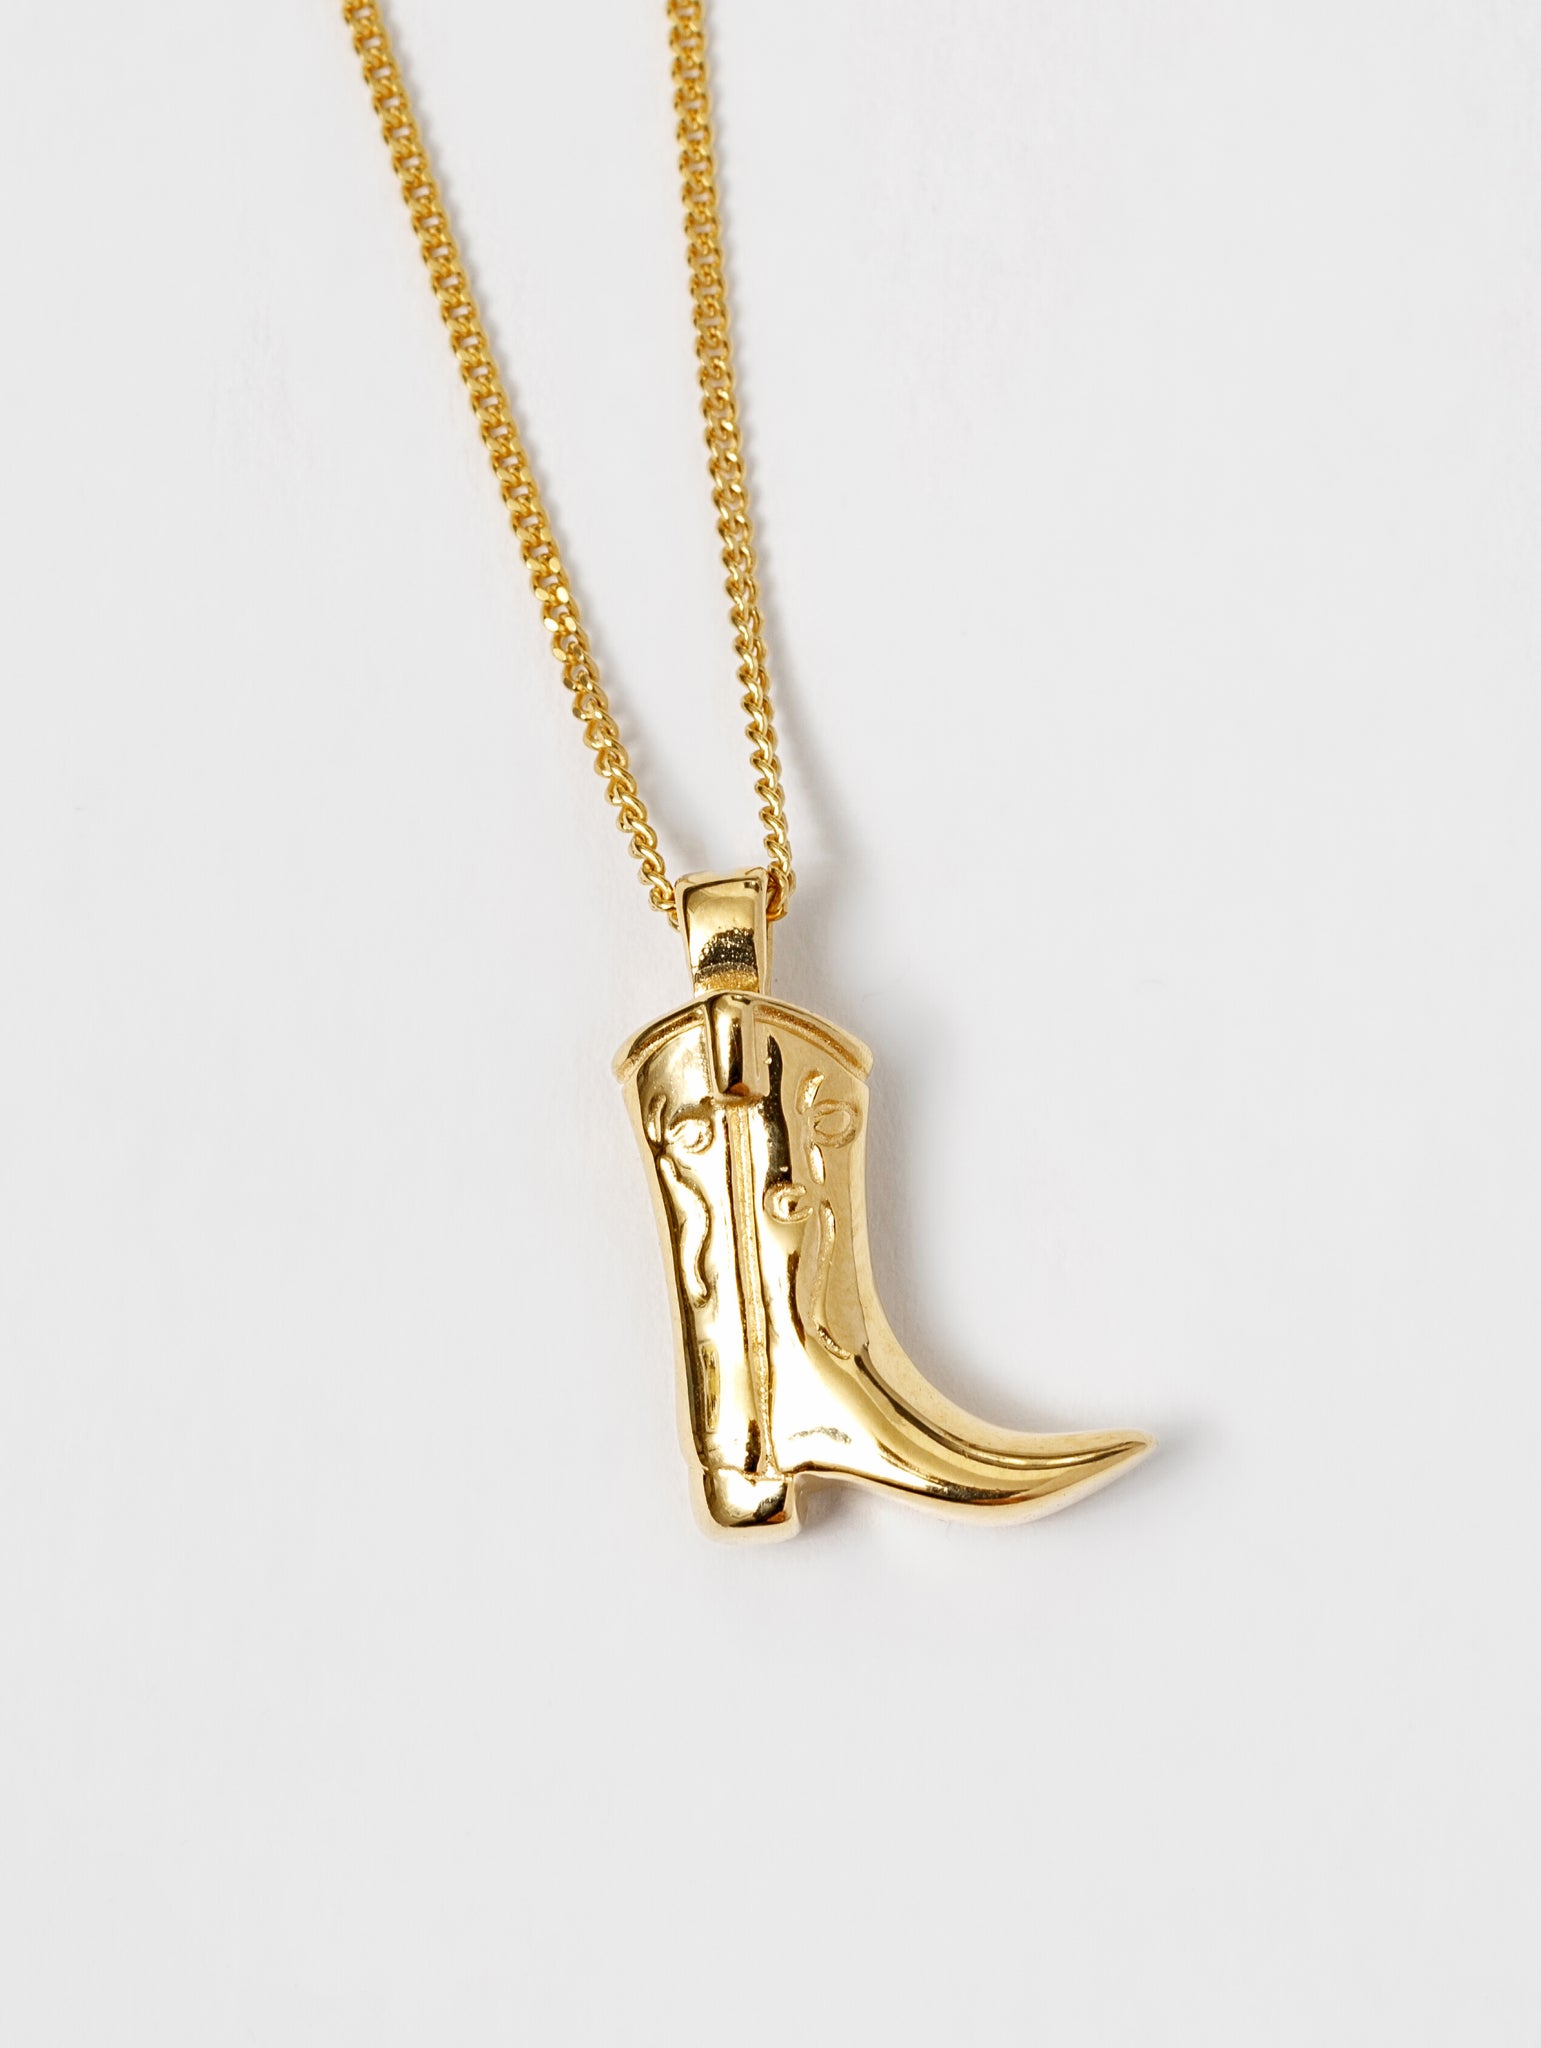 Cowboy Boot Charm Necklace in Gold